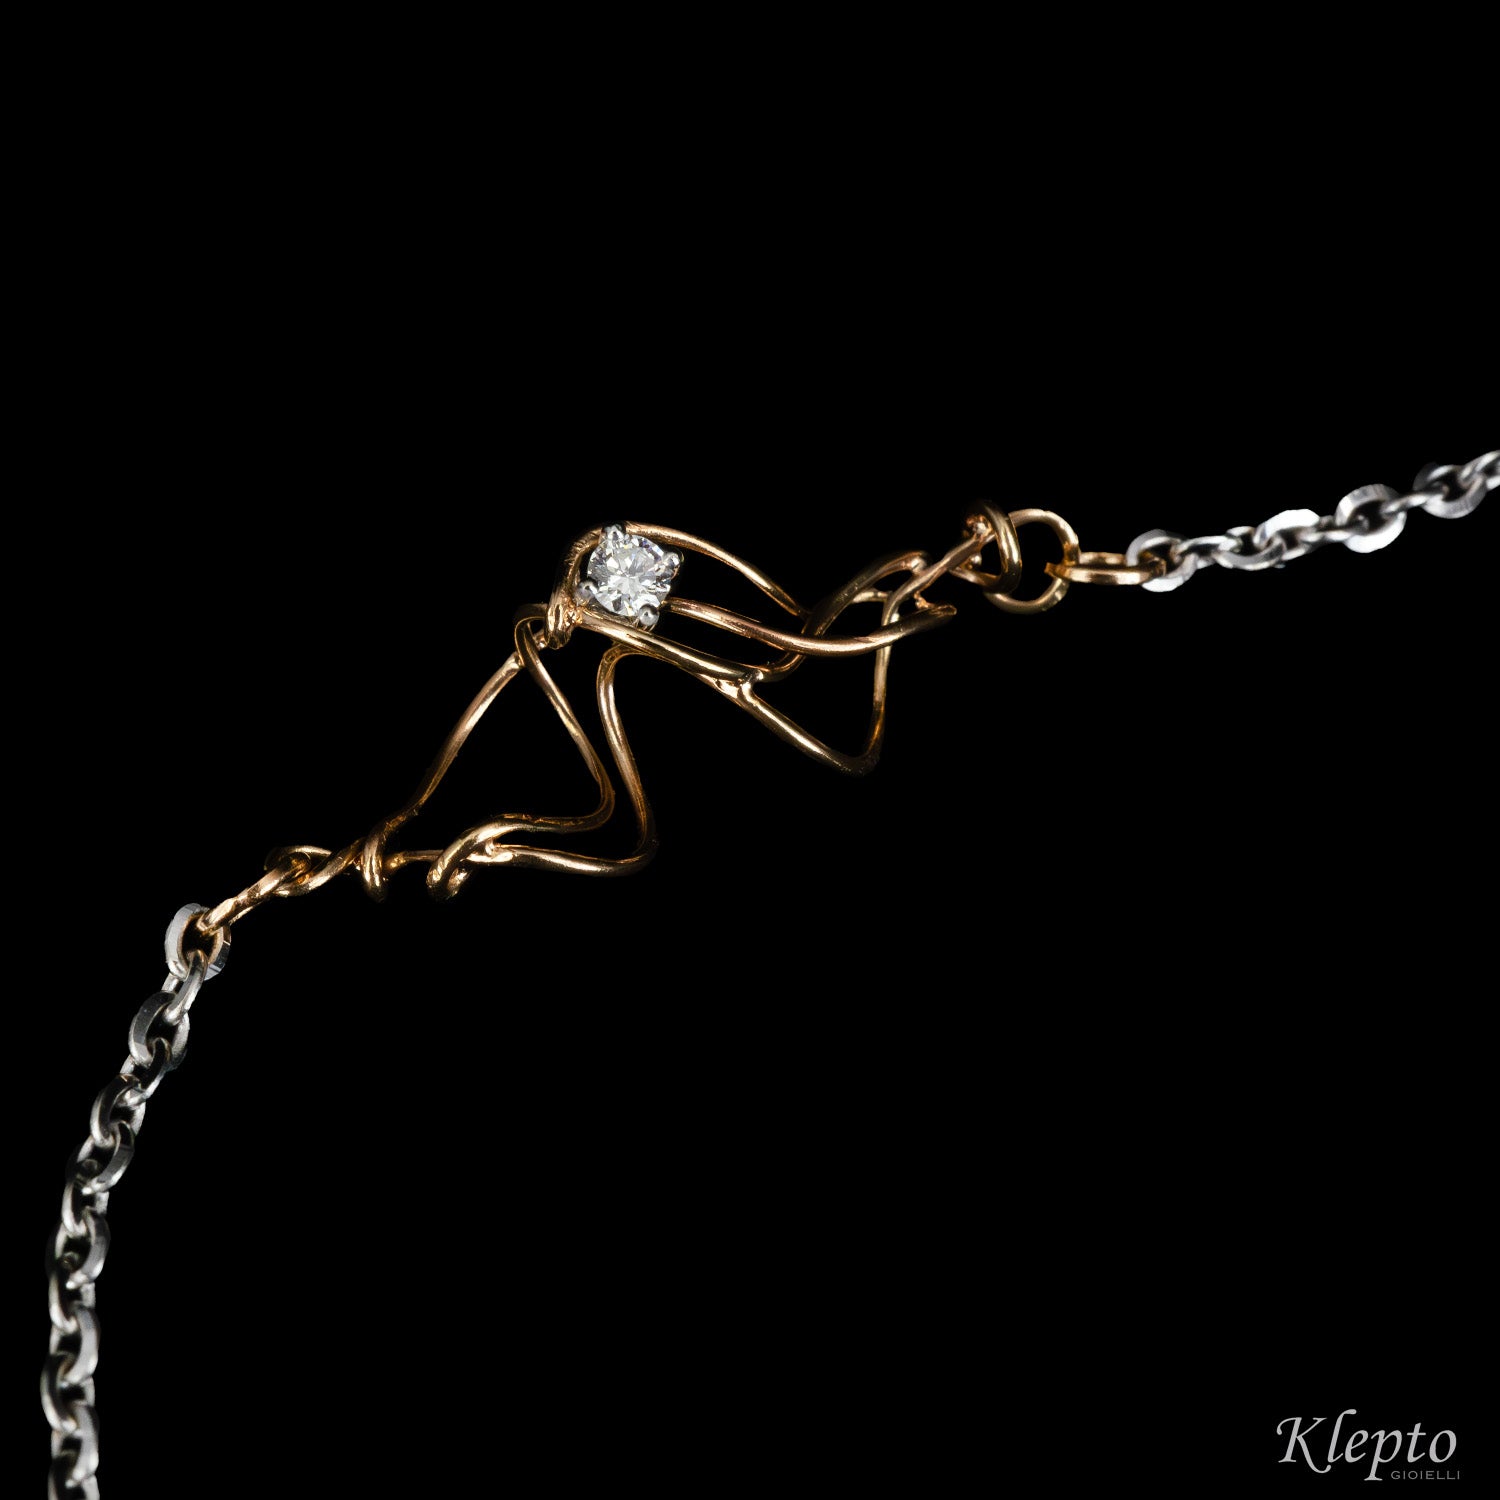 White gold bracelet with diamond and rose gold knot